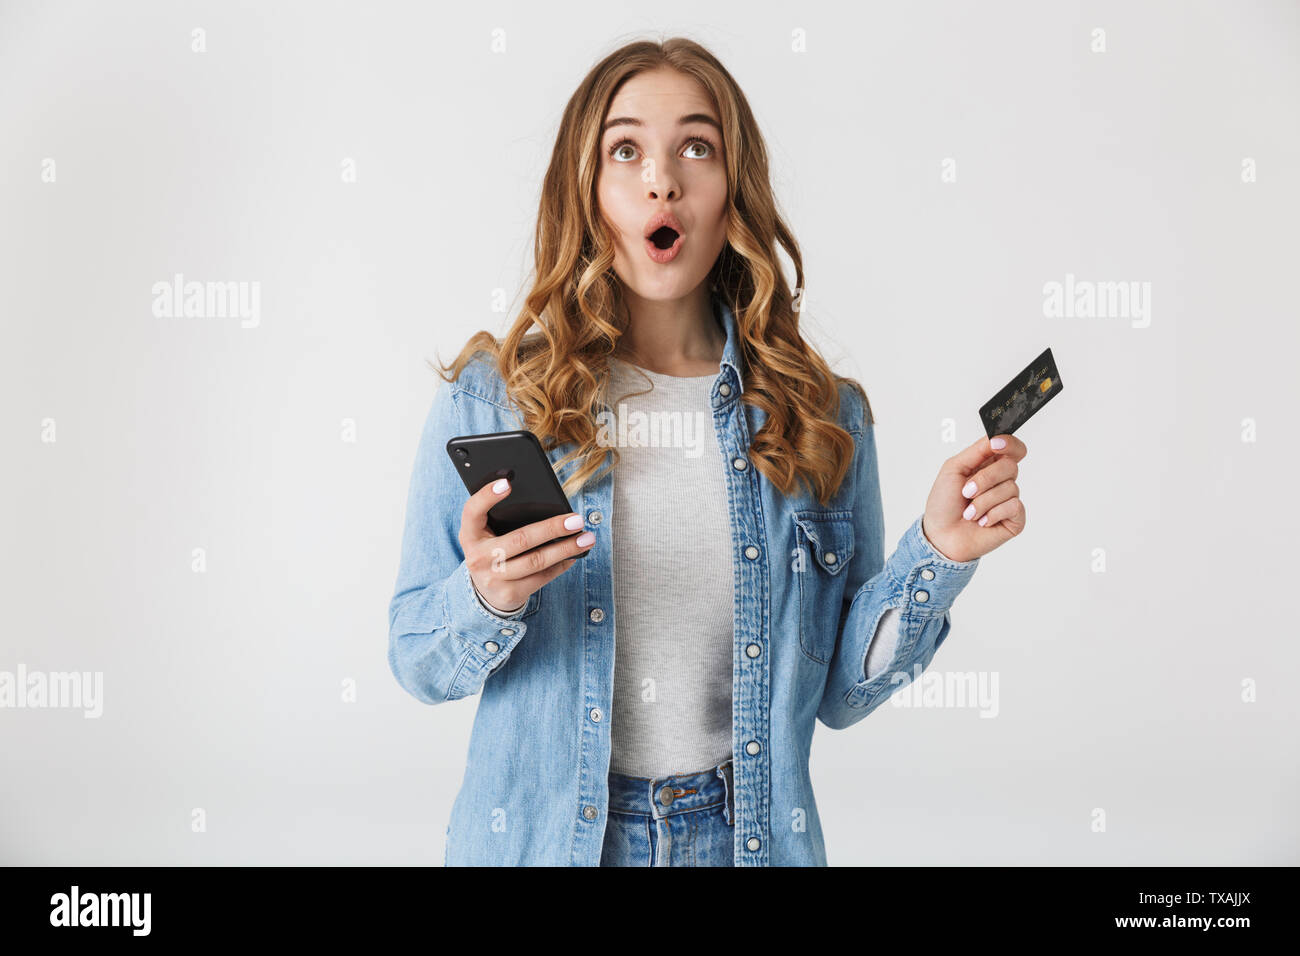 Image d'un choqué belle jeune femme assez excité posing isolated over white wall background using mobile phone holding credit card. Banque D'Images